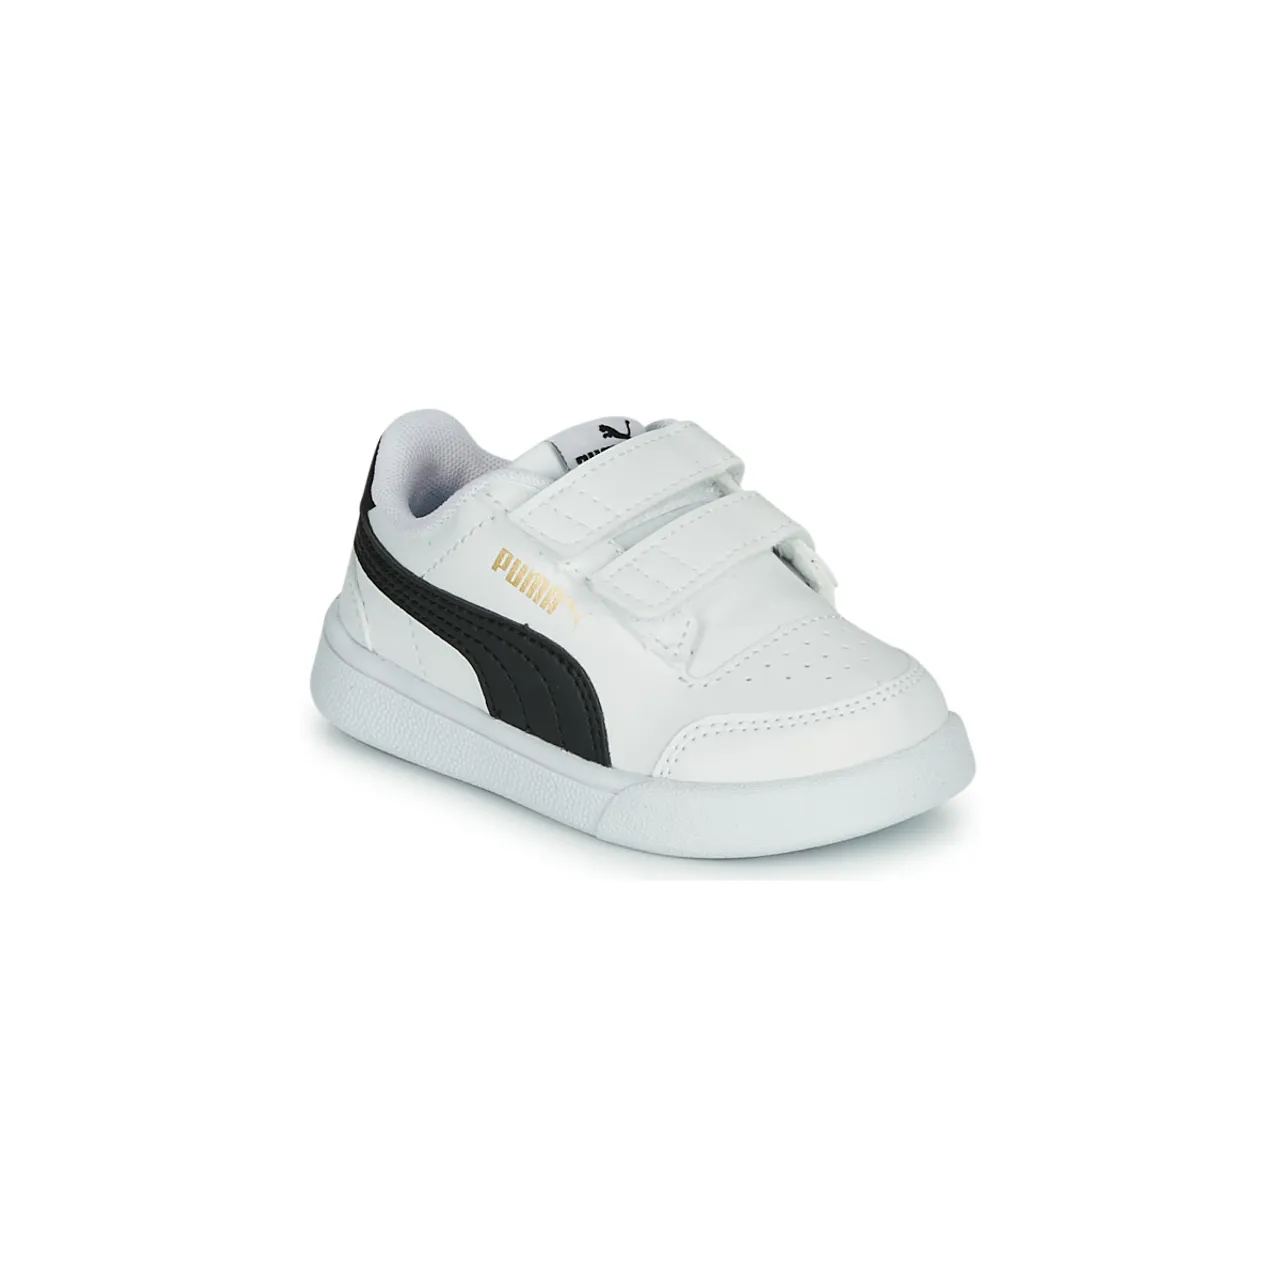 Puma  SHUFFLE INF  girls's Children's Shoes (Trainers) in White